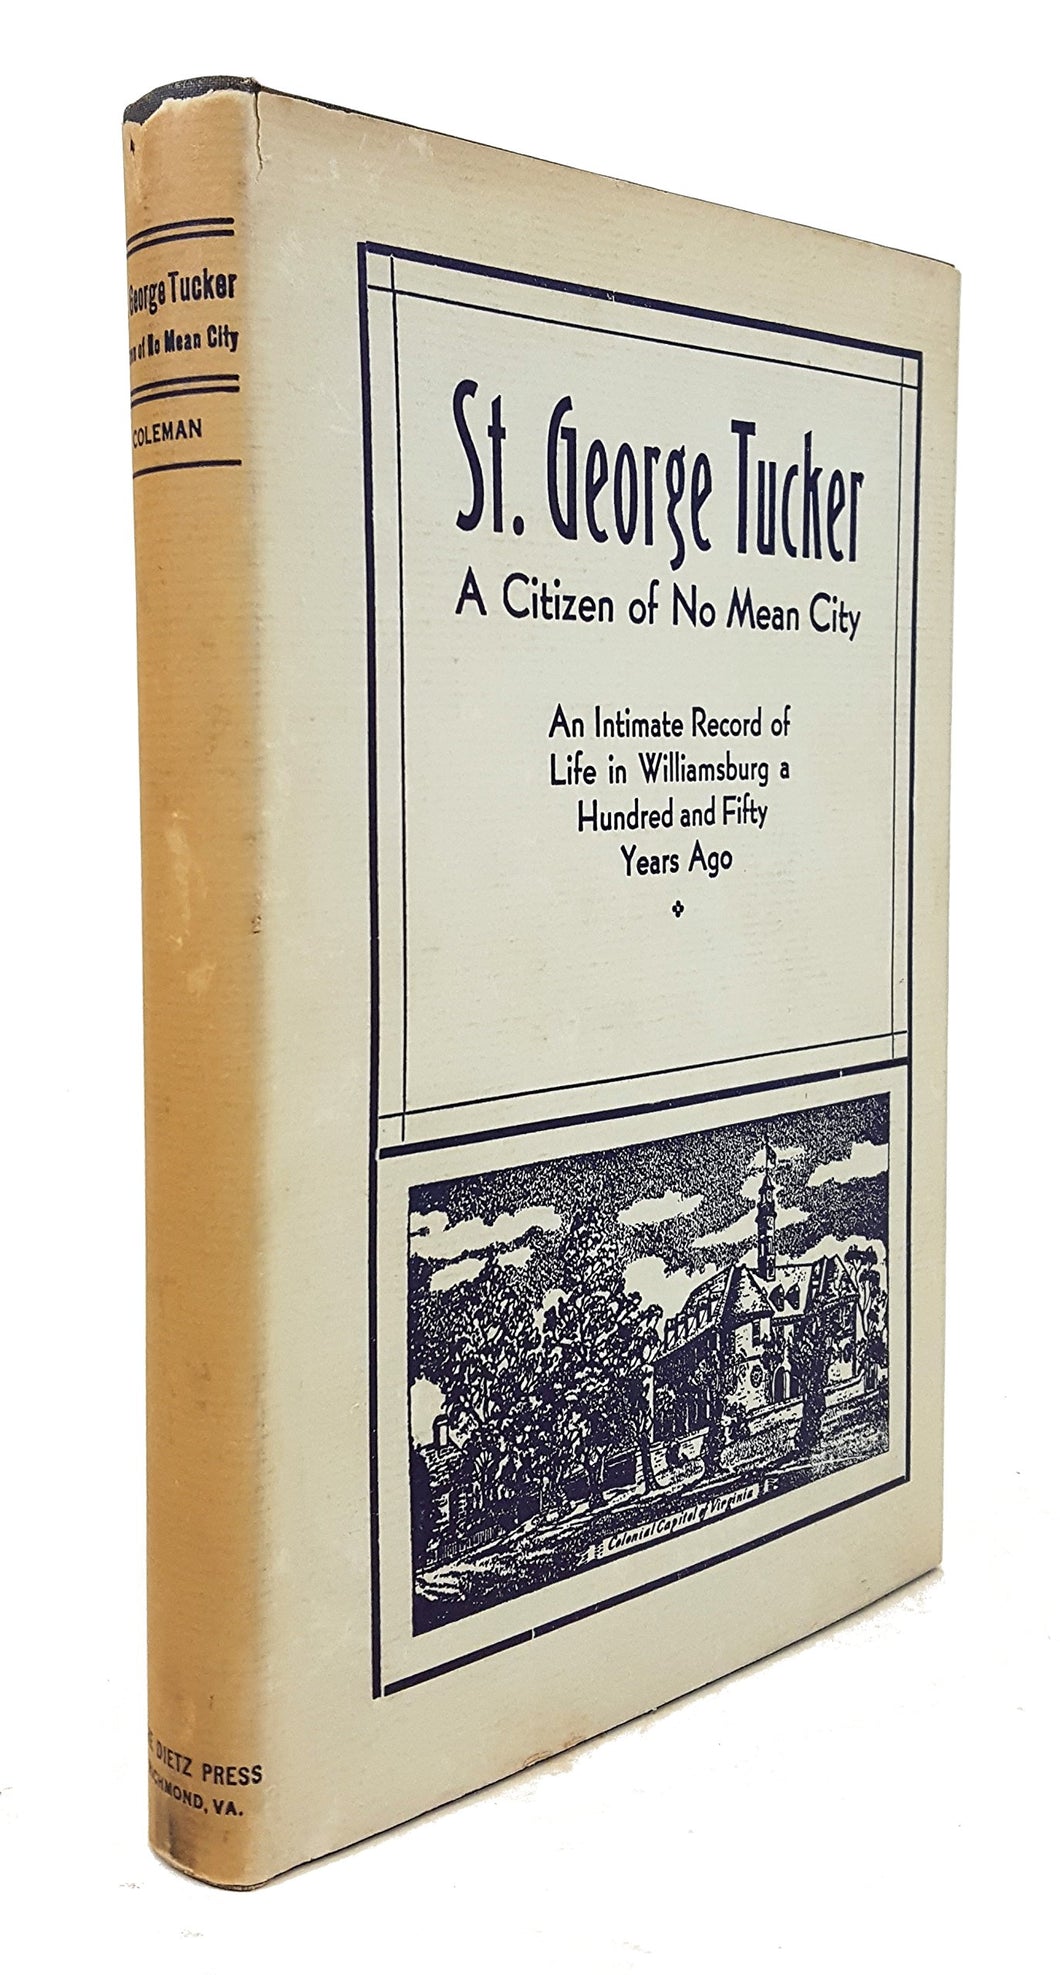 St. George Tucker Citizen of No Mean City